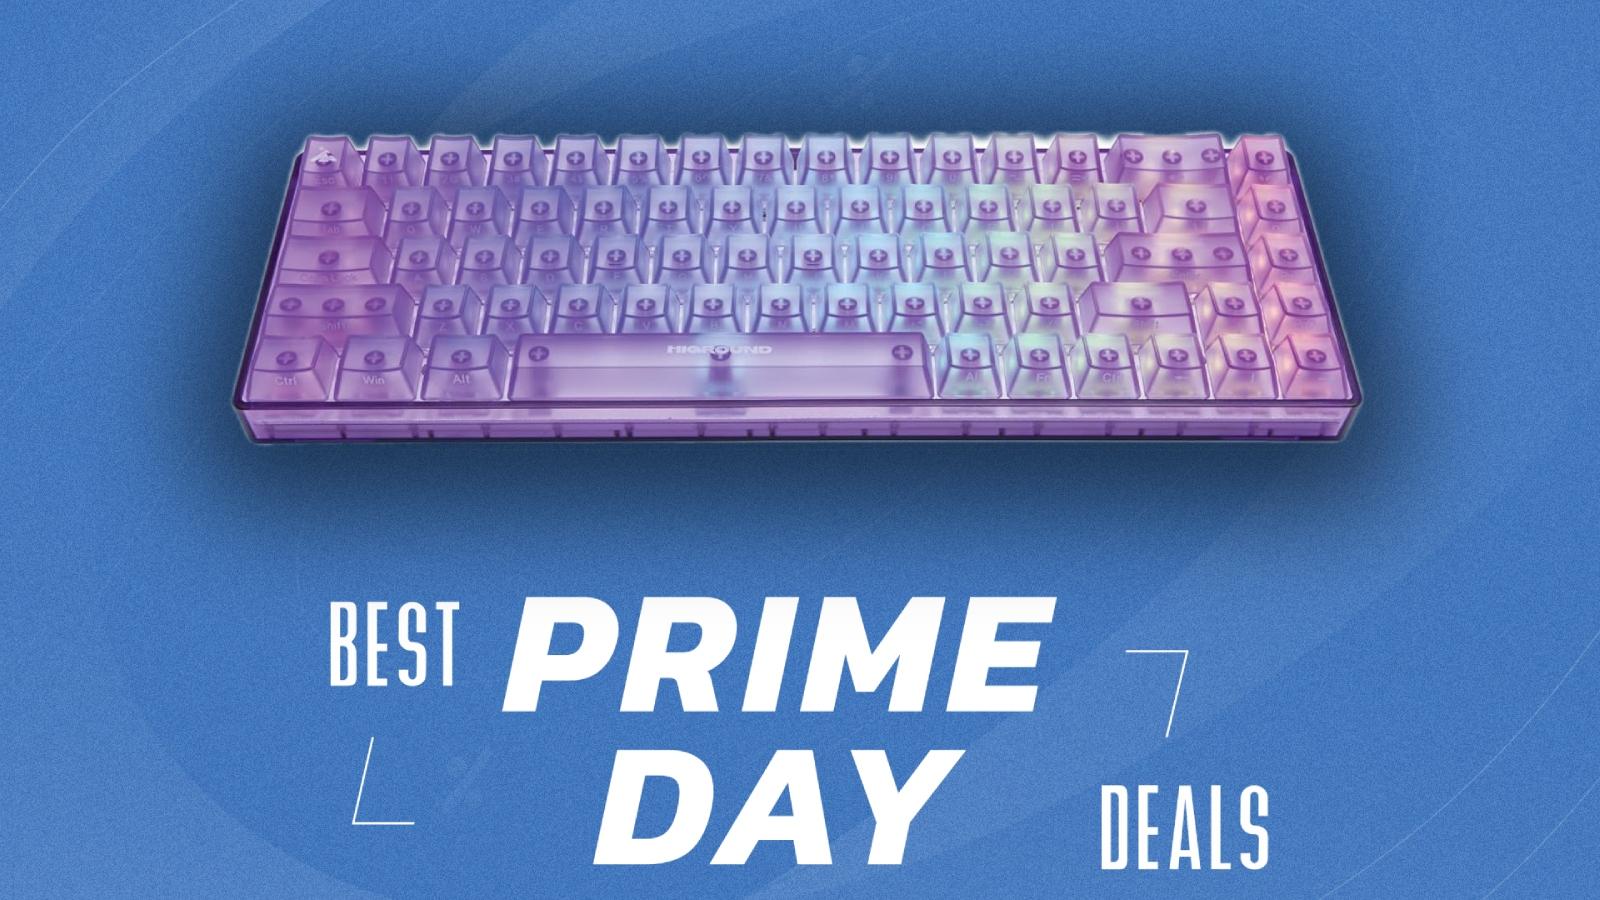 Higround Basecamp in purple on blue background with Prime Day deals lettering